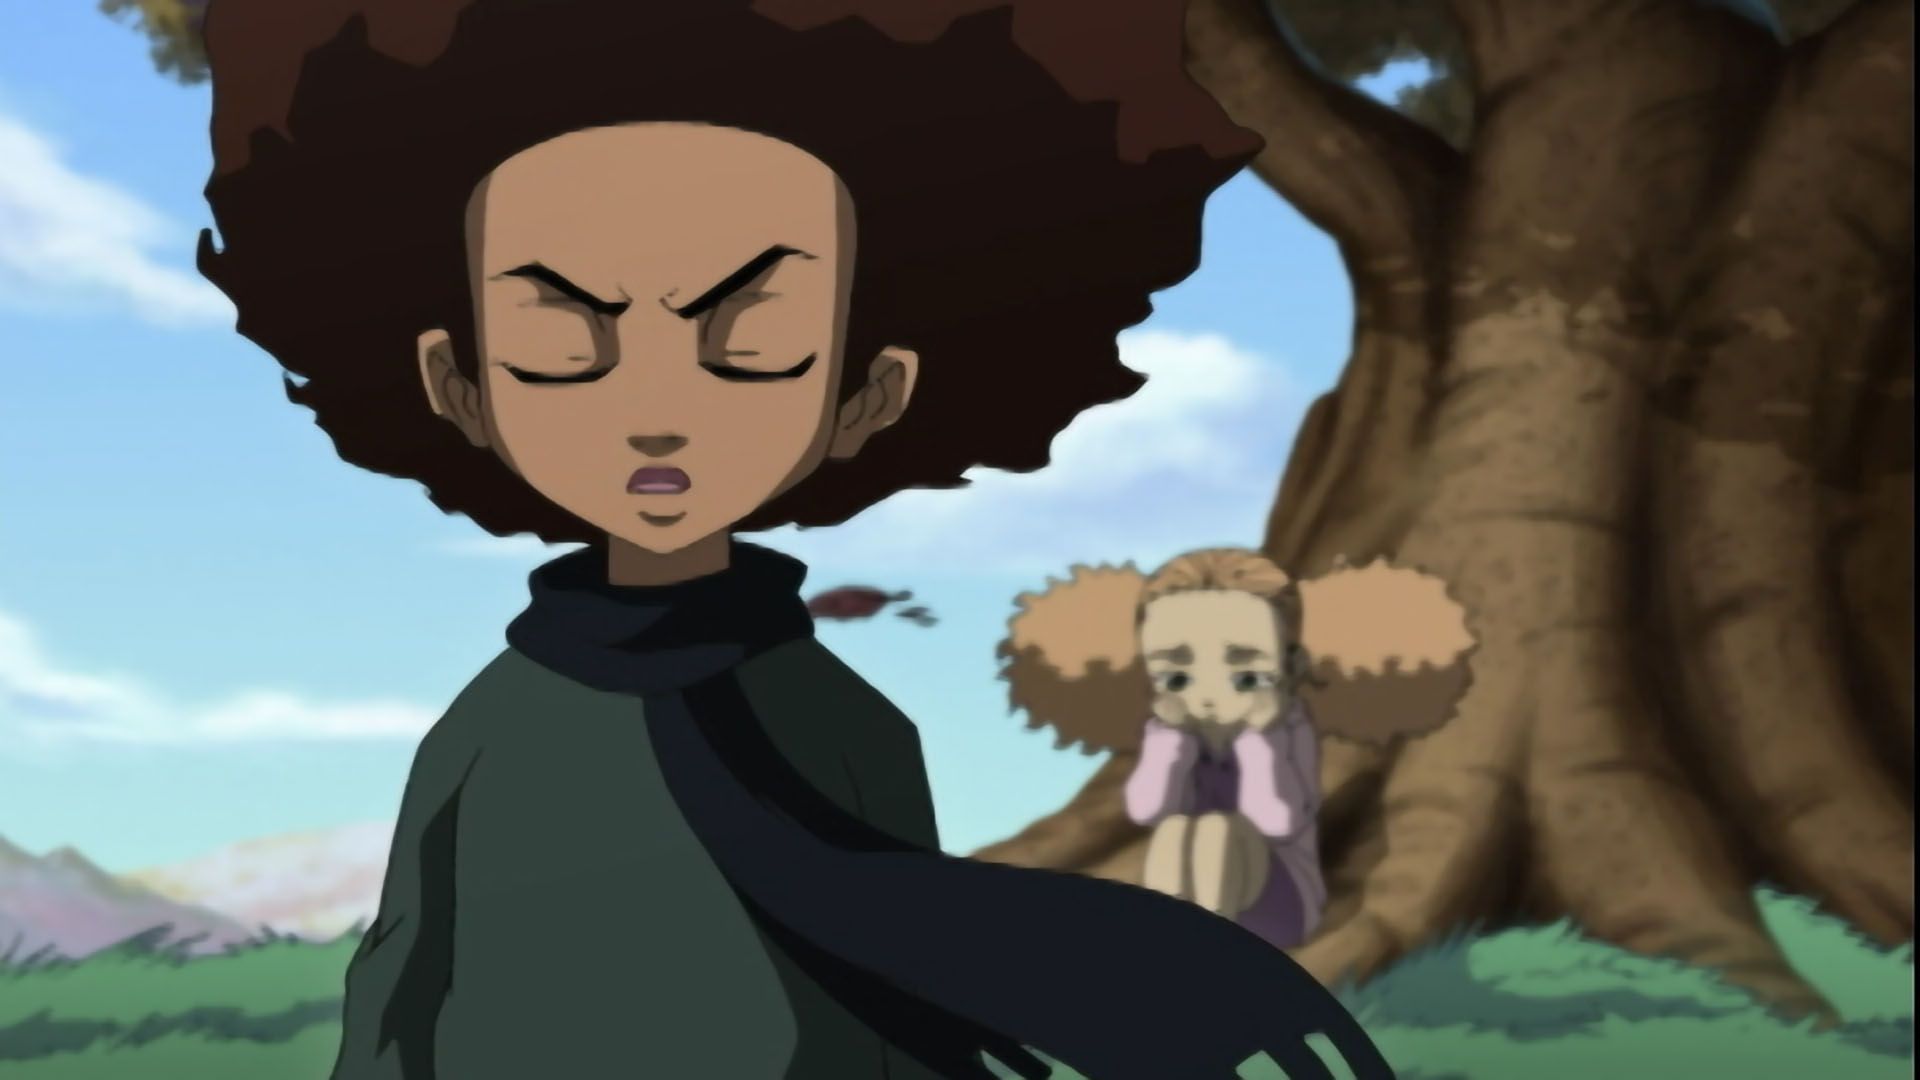 The Real - S1 EP6 - The Boondocks. 